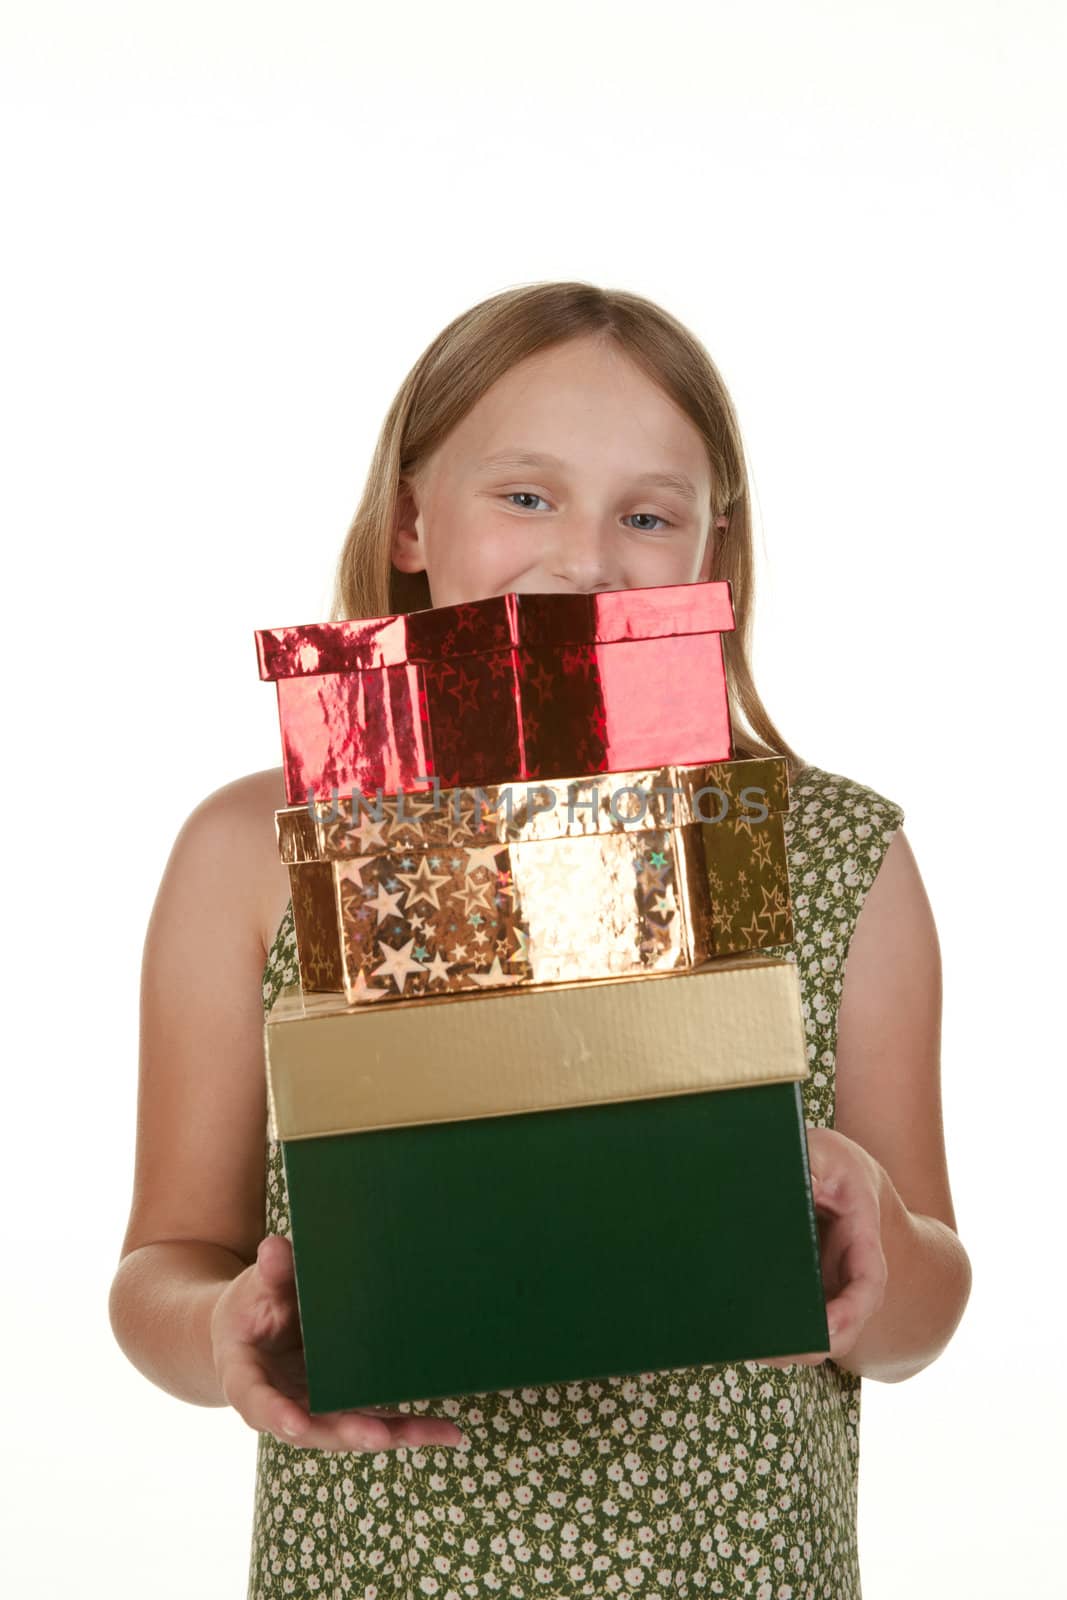 young girl with presents by clearviewstock